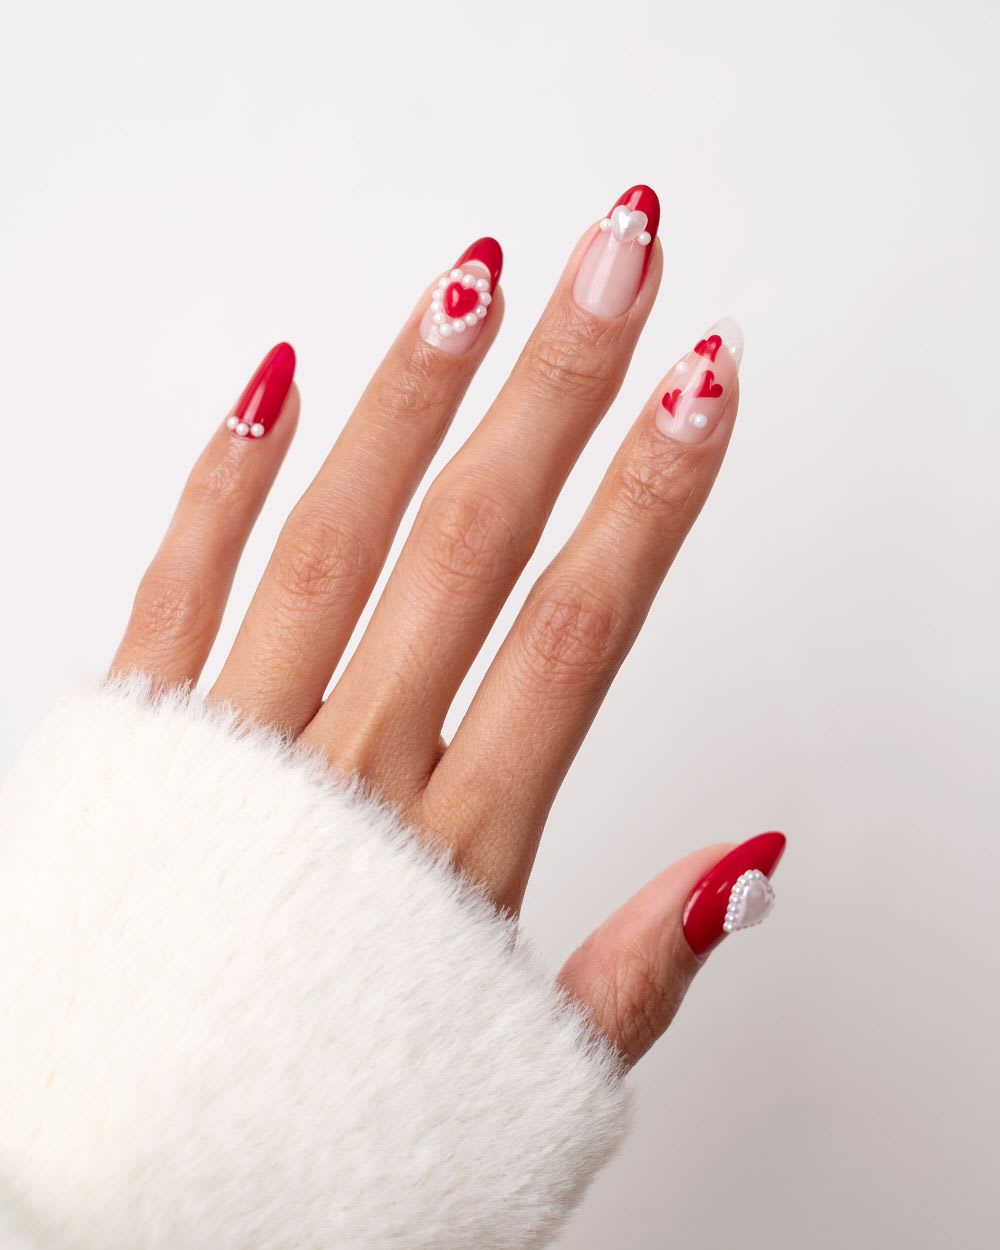 Try This Heart Nail Art With Pearls For V-Day - Lulus.com Fashion Blog